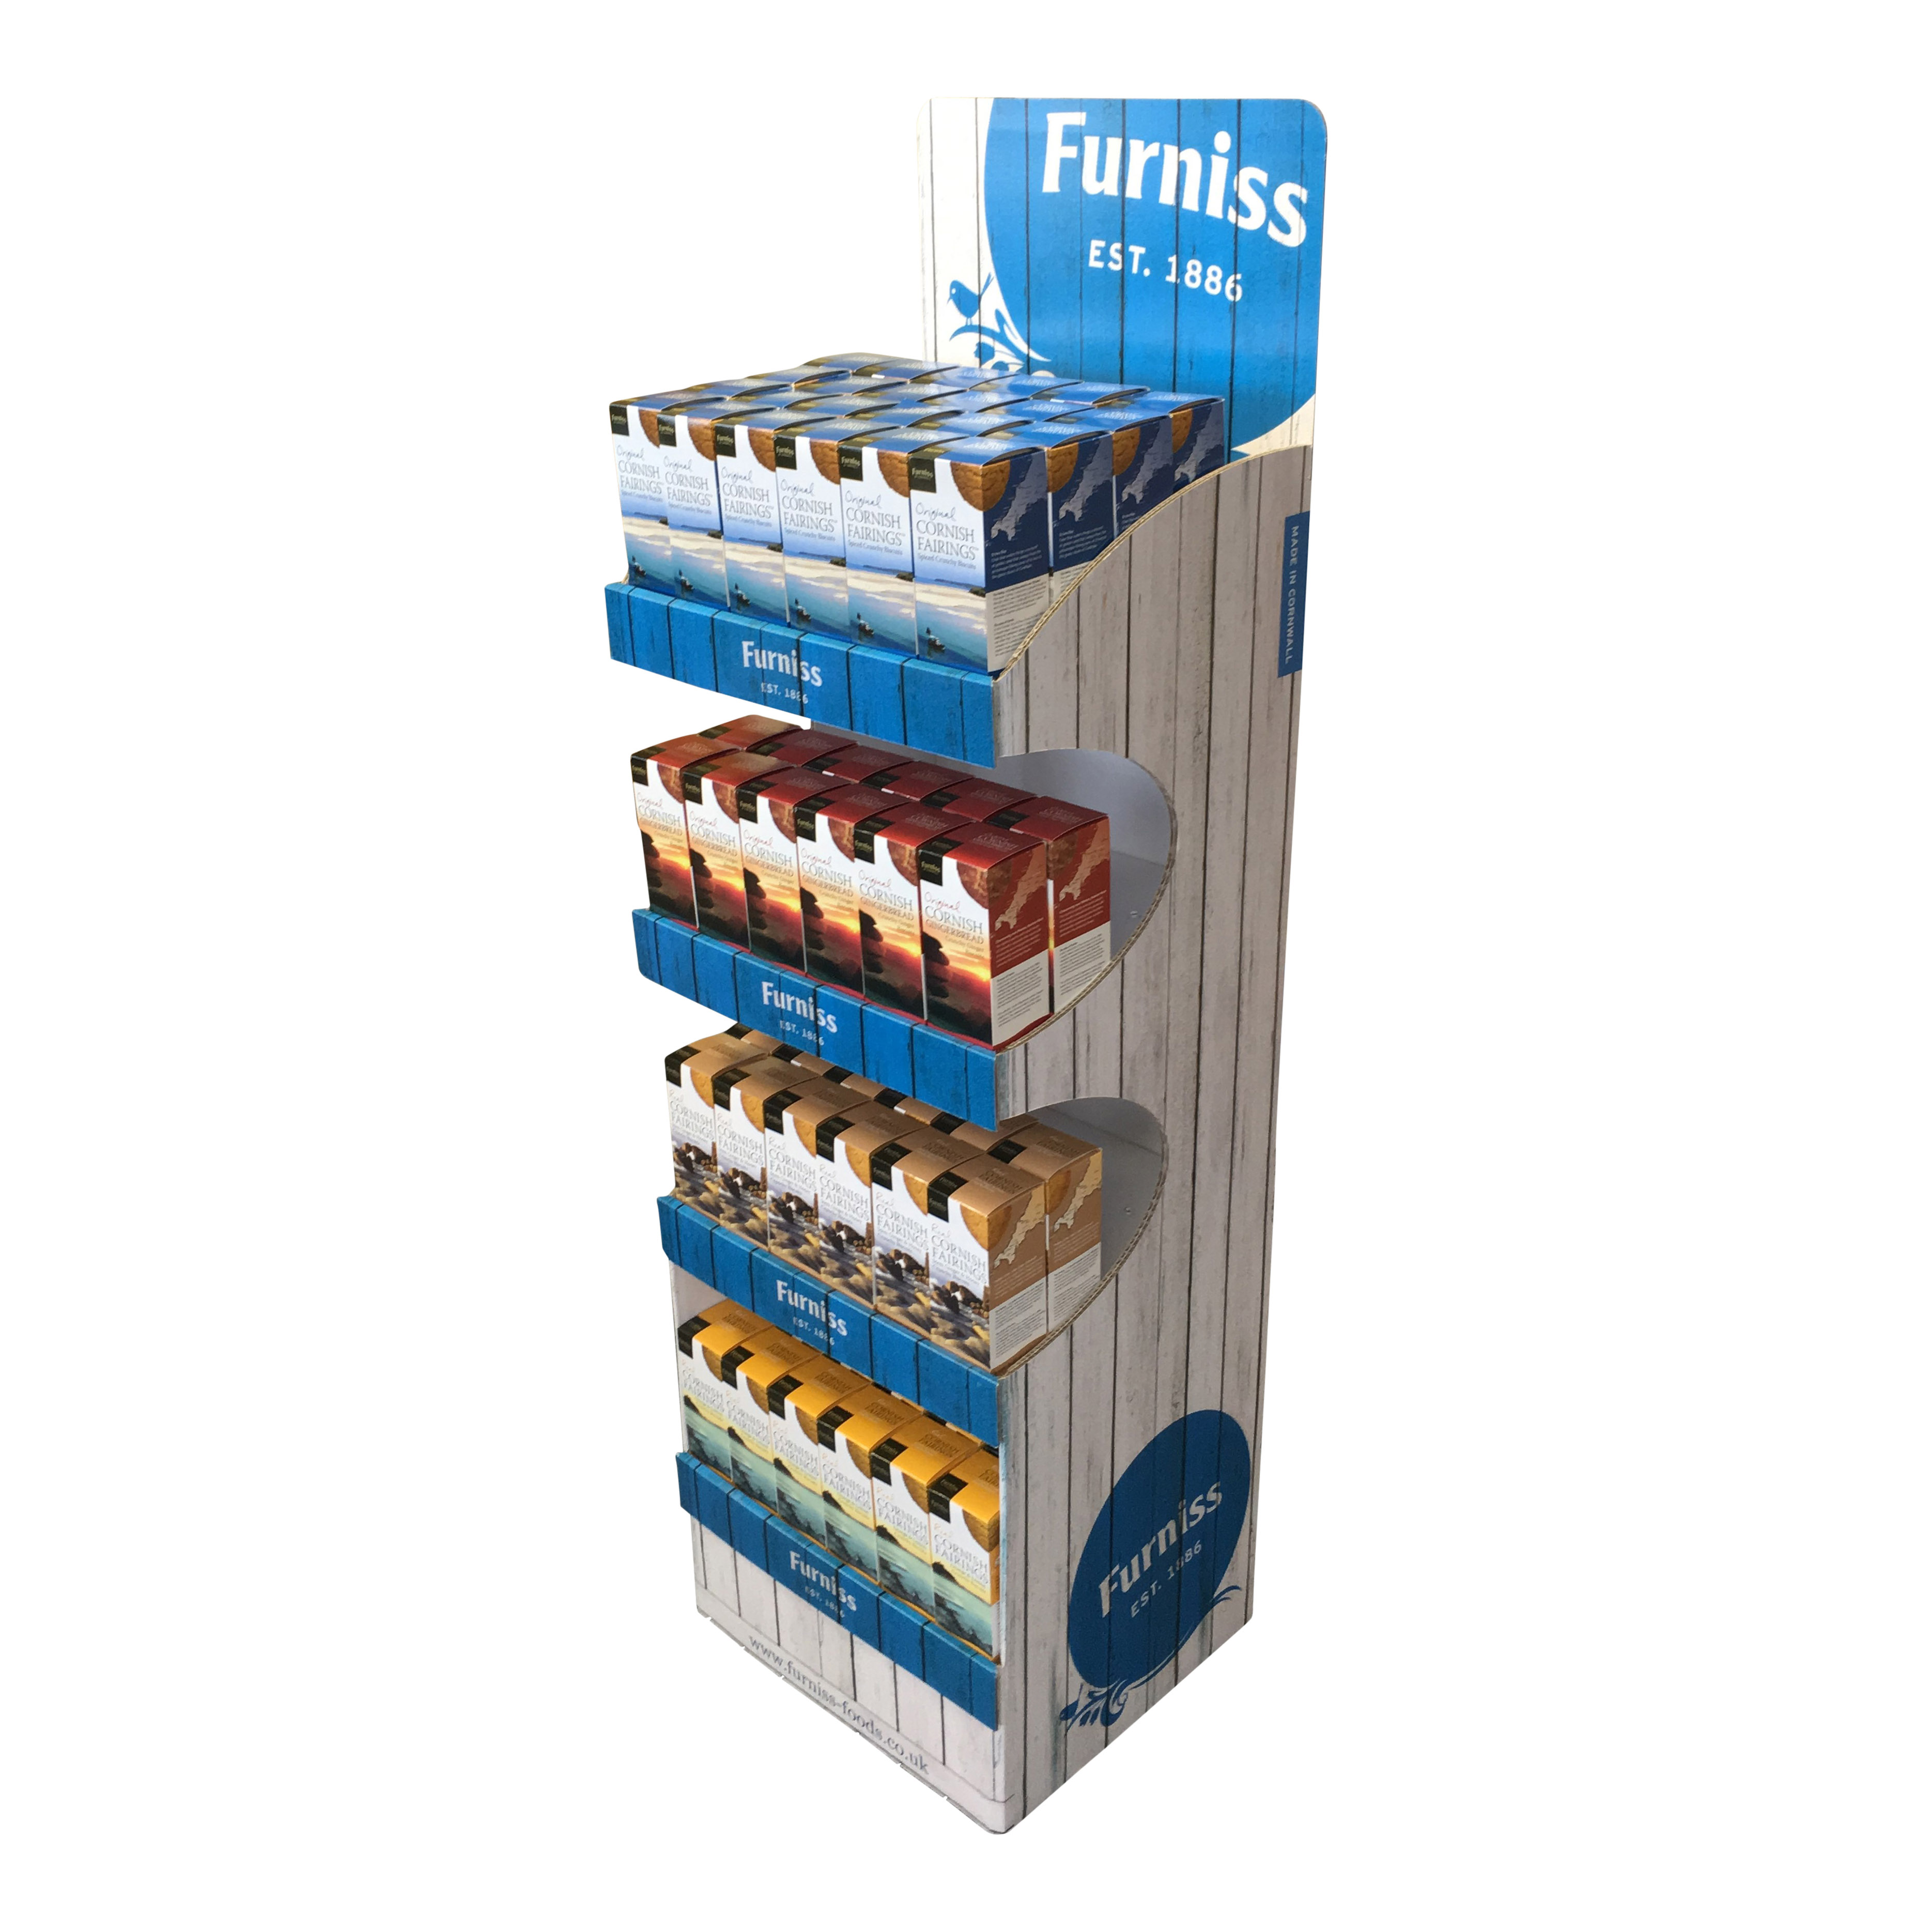 Furniss Biscuit Display Stand